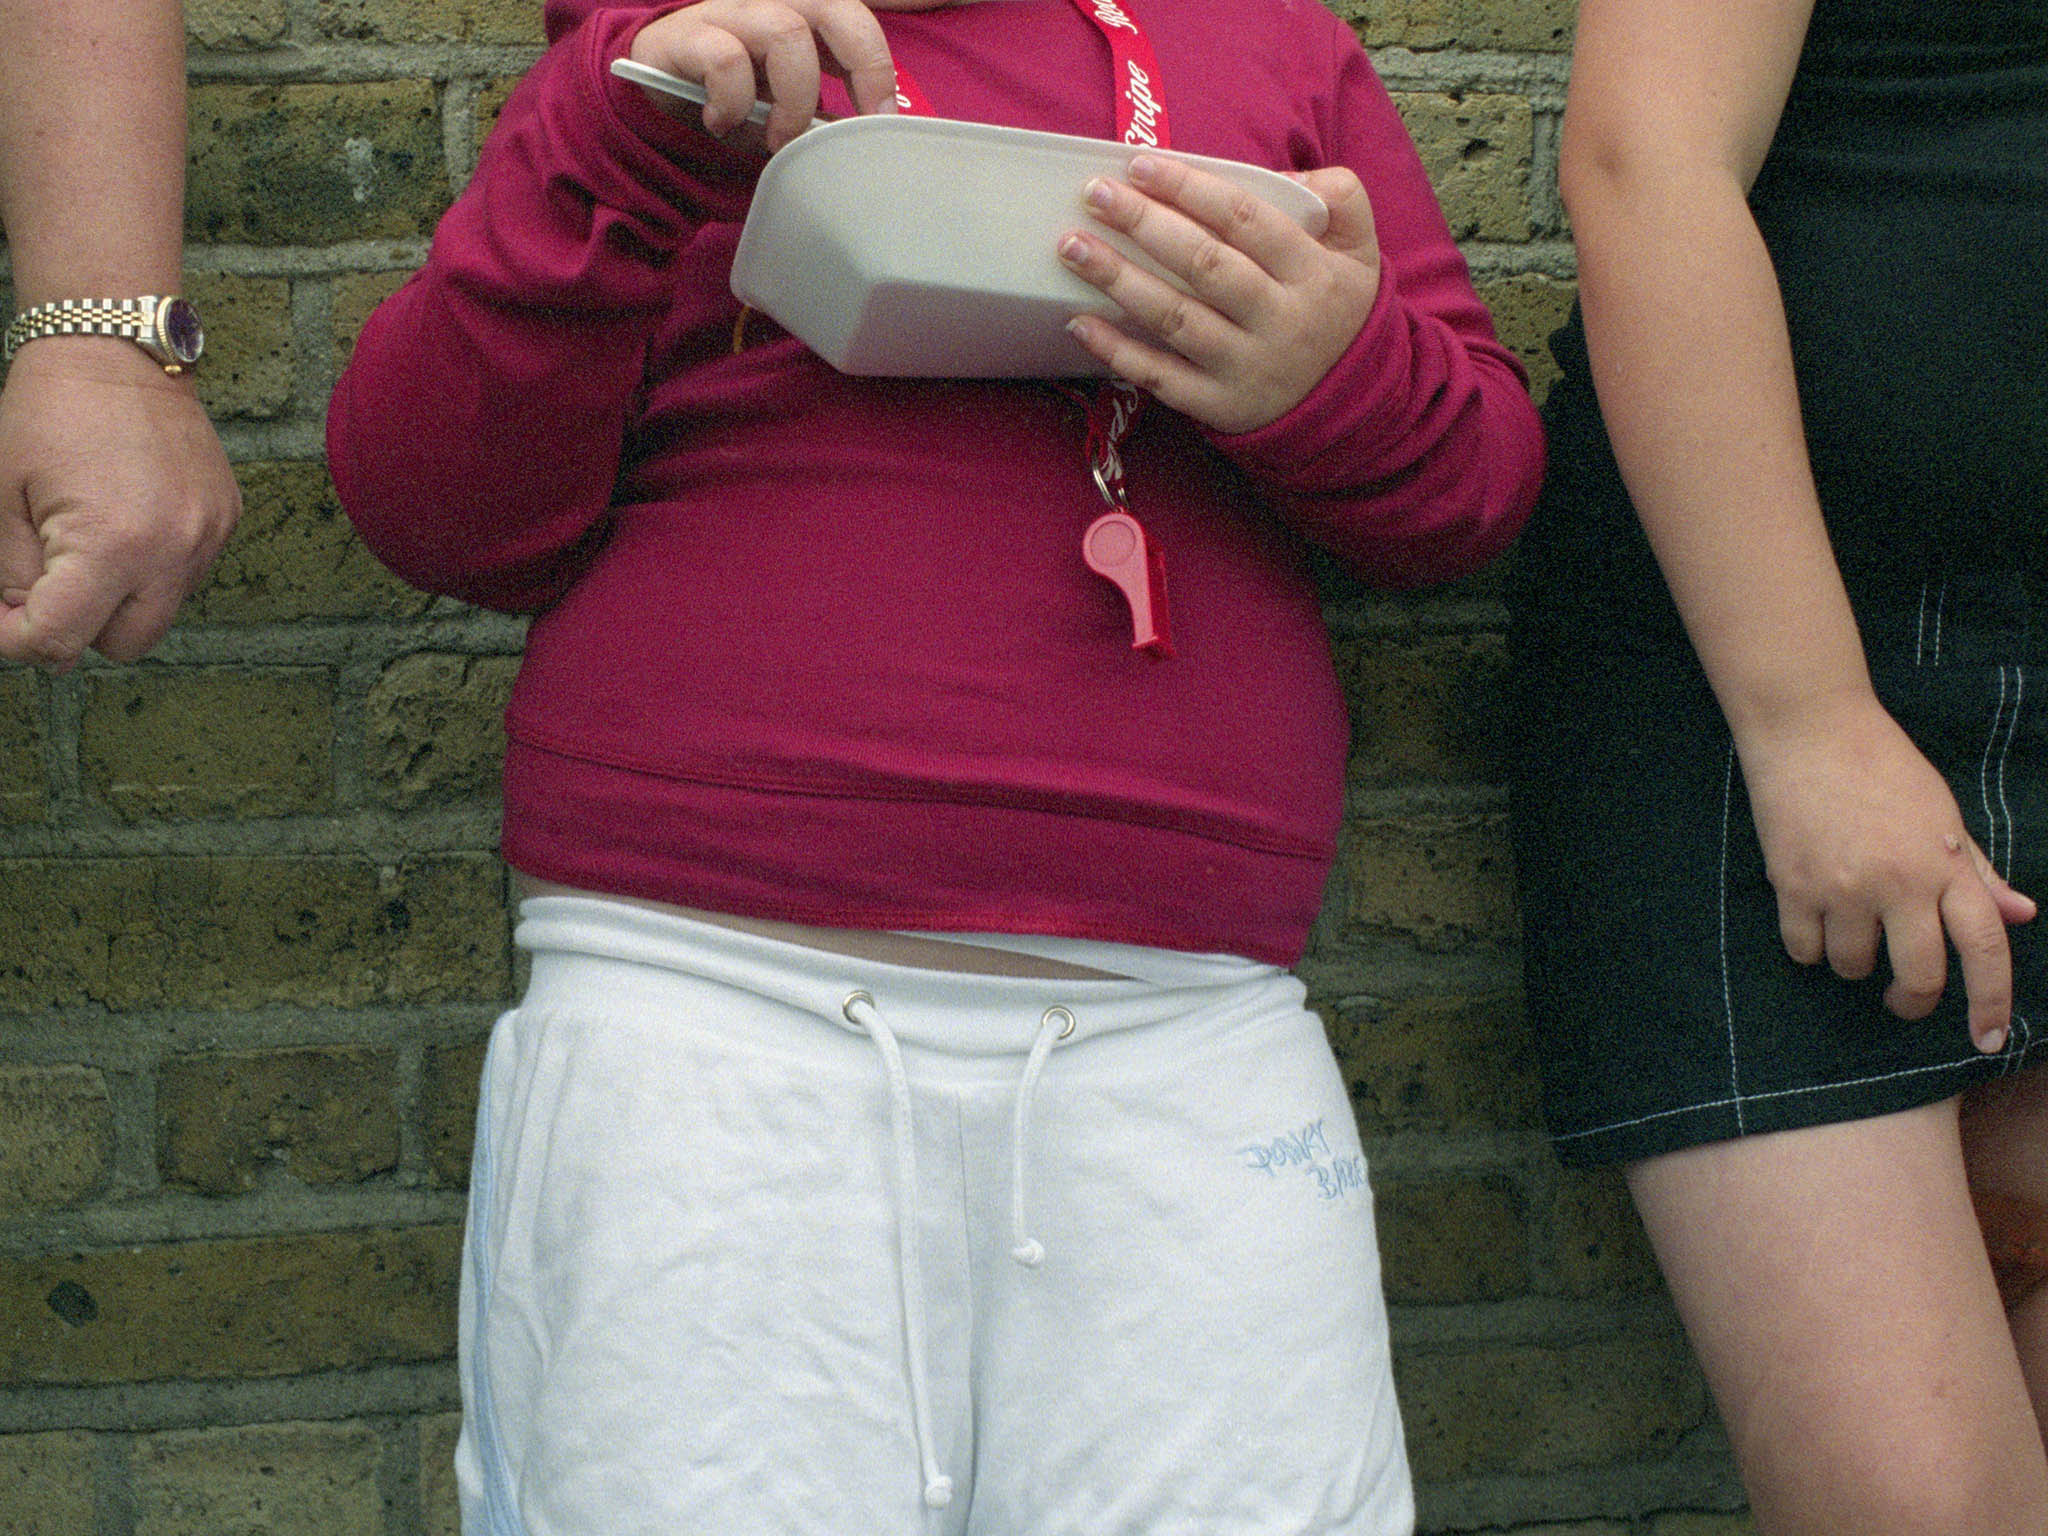 Overweight child eating chips